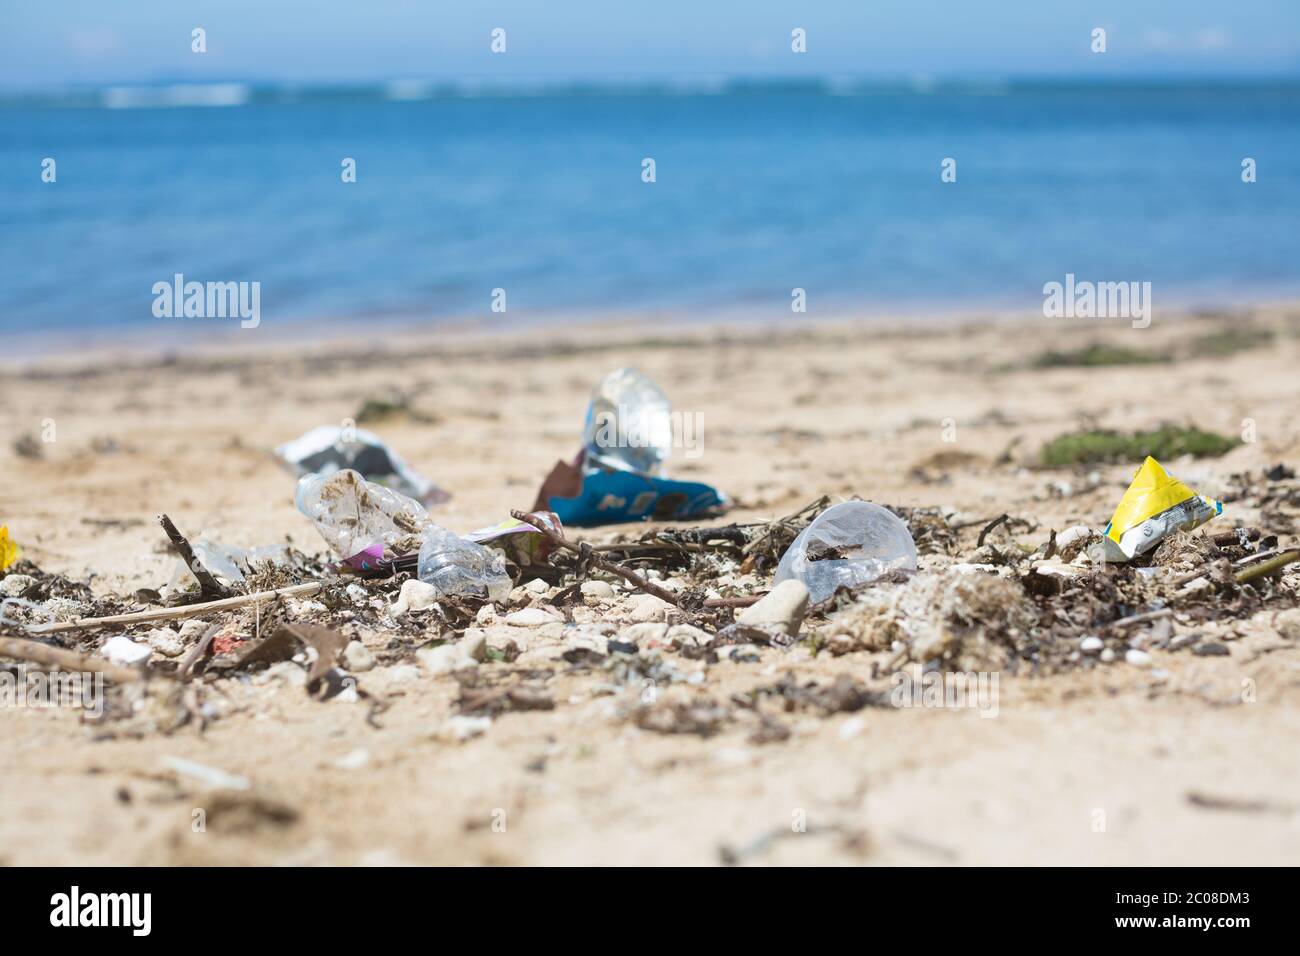 Garbage and litter lying on the sand in Asia with the ocean background. Stock Photo